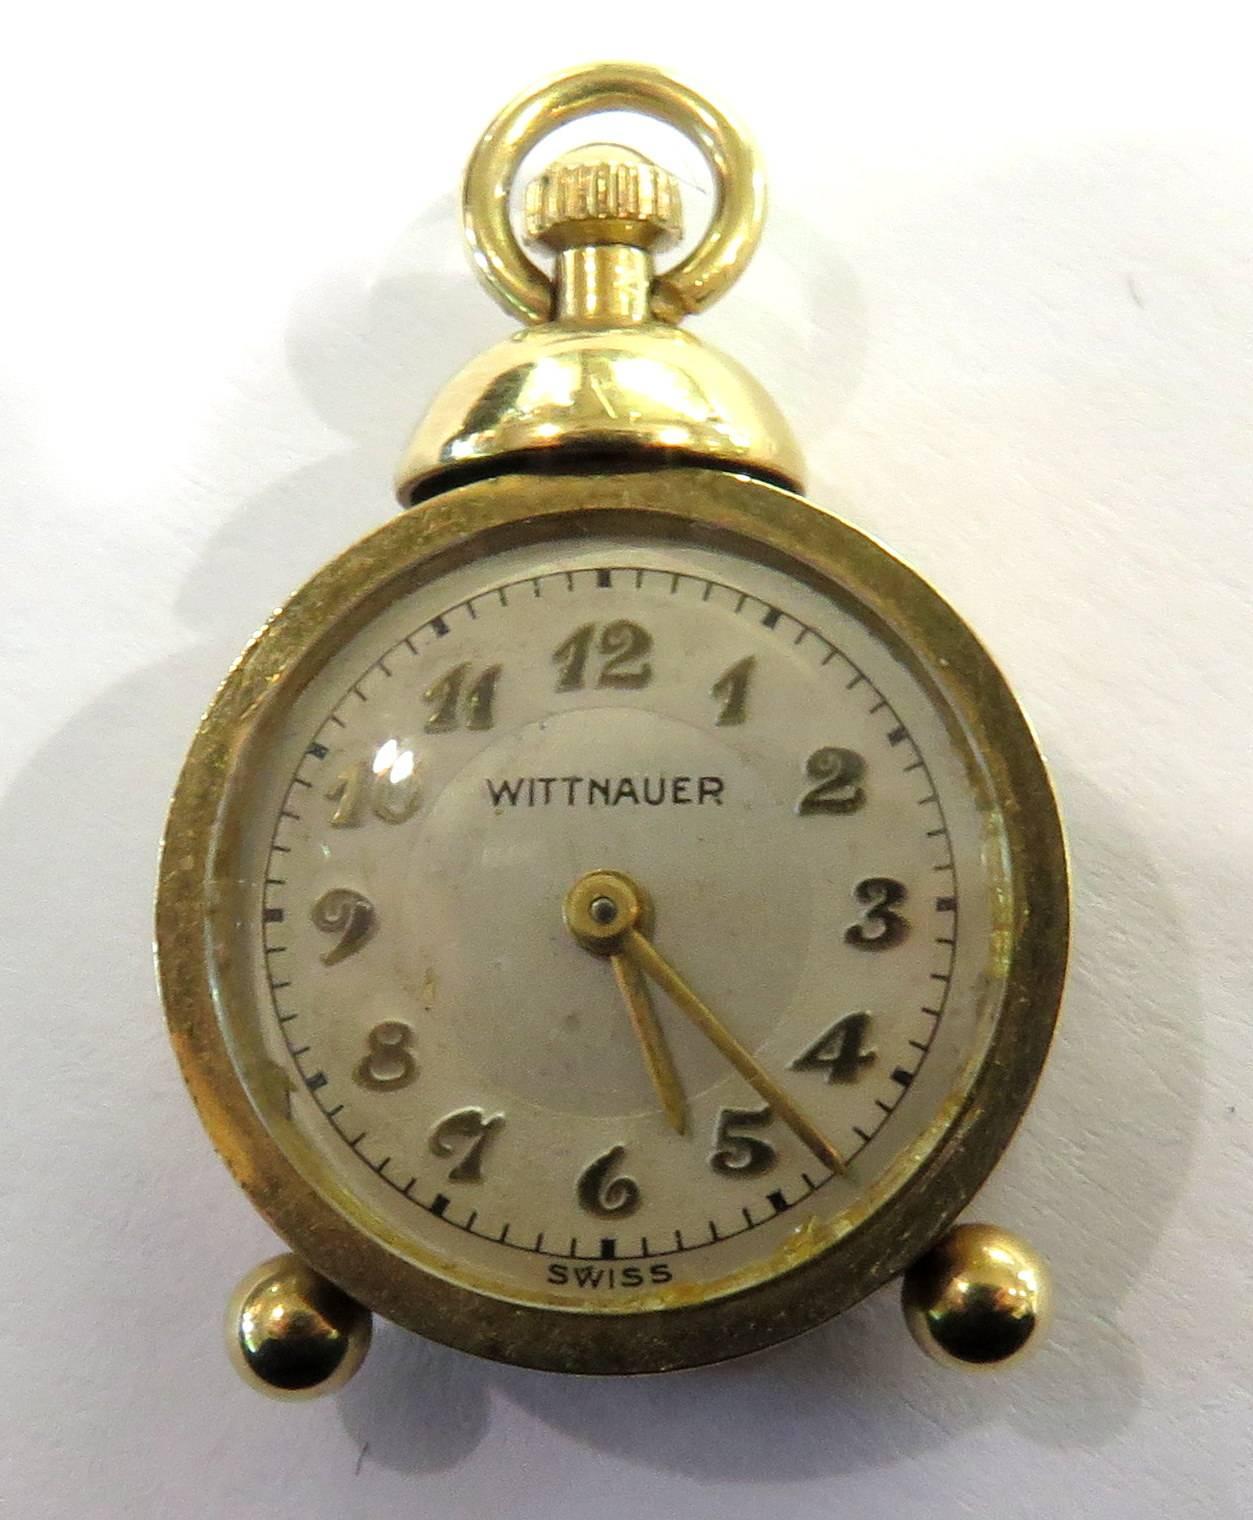 This fabulous 14k gold charm is an actual miniature Wittnauer clock that does not work. Actually, since I wound this mini clock, it IS working! No guarantee how long though. This charm pendant would be a great & unique addition to any charm bracelet